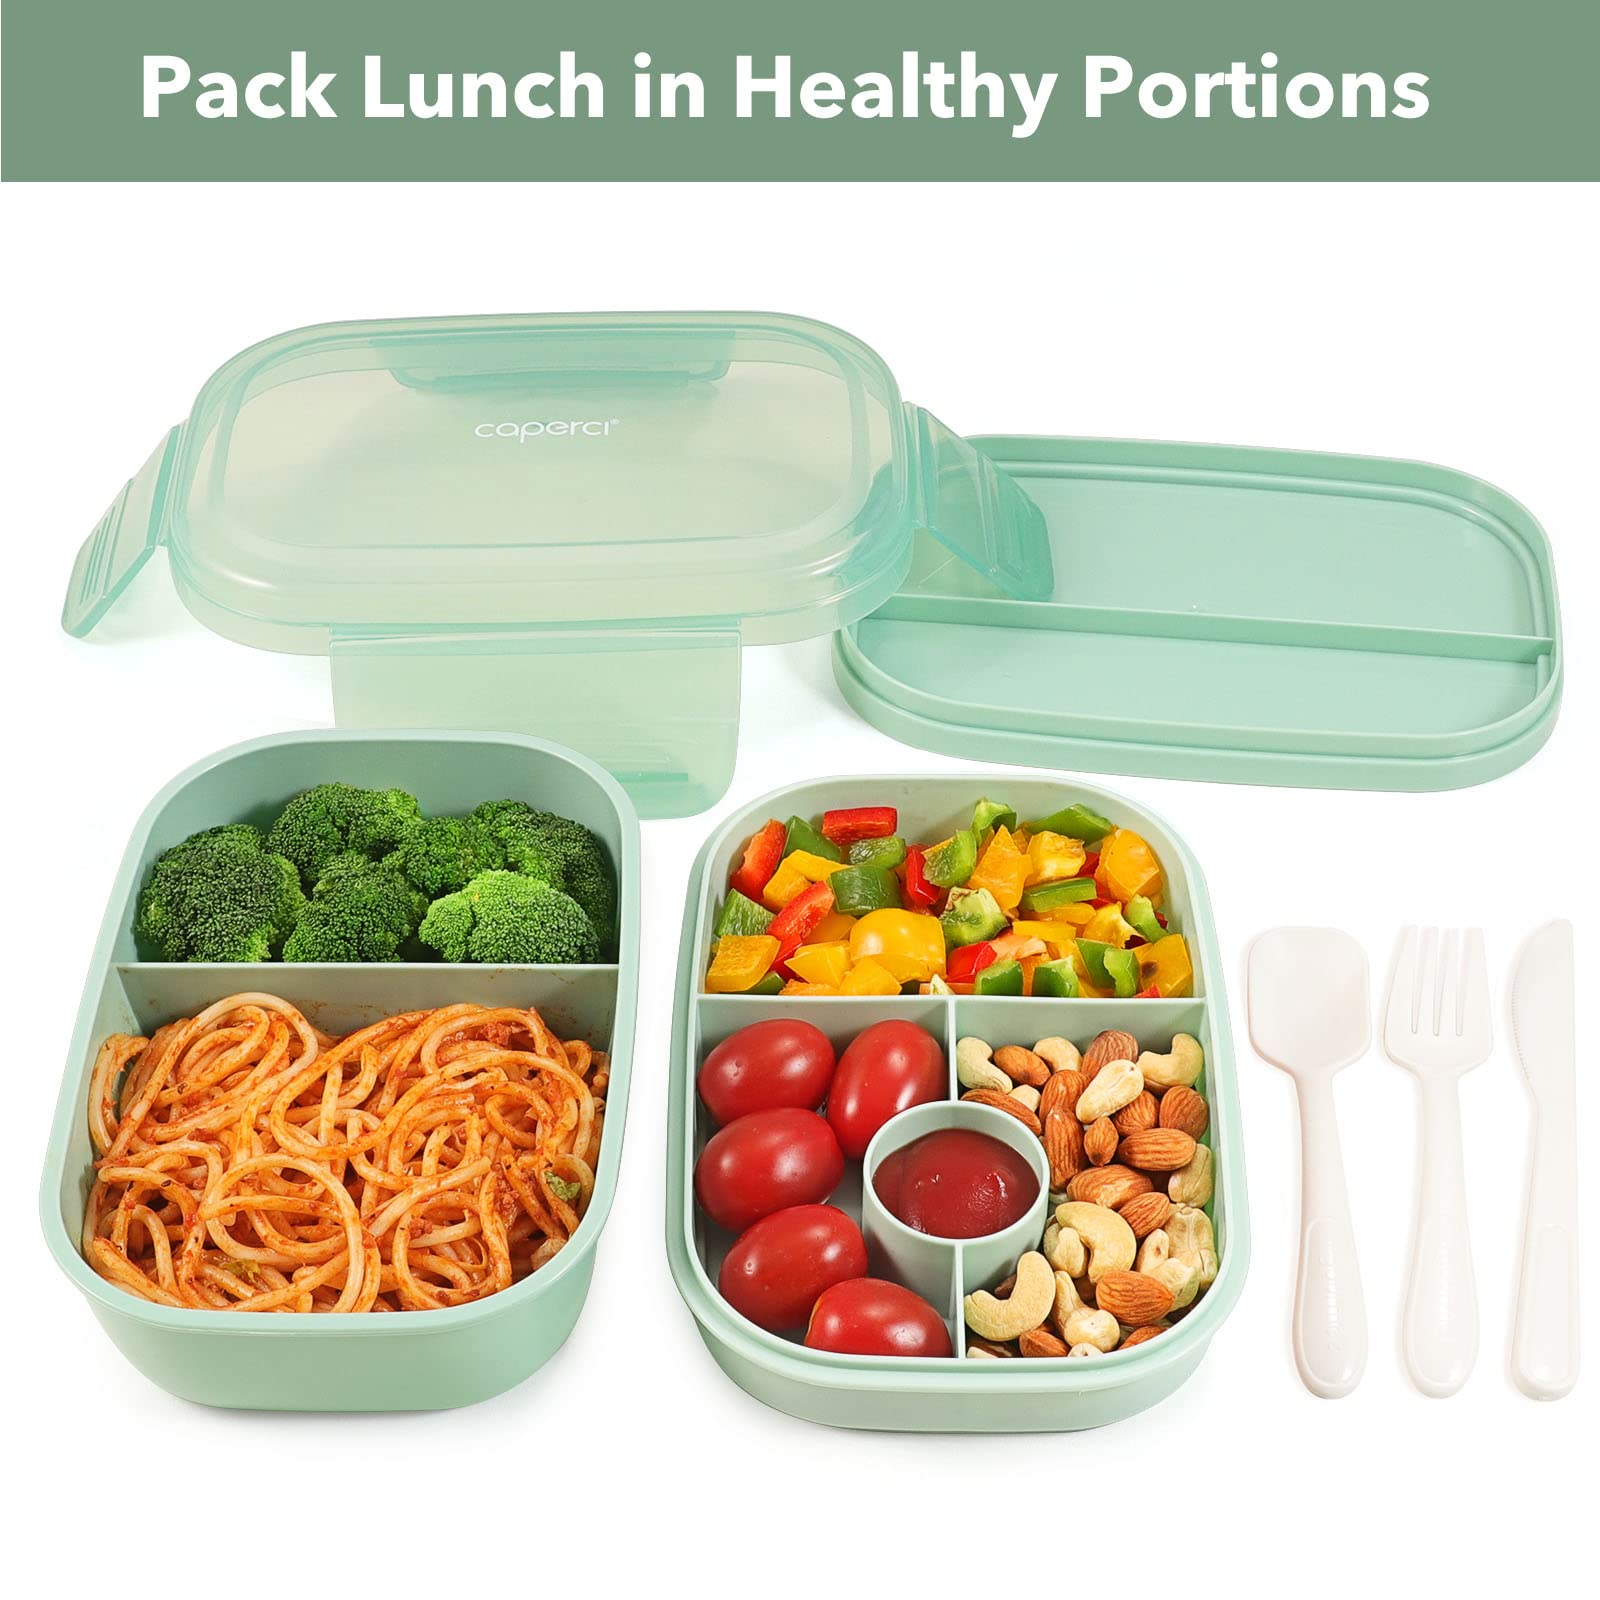 Caperci Classic Bento Box Adult Lunch Box for Older Kids - Leakpoof 47 oz  3-Compartment Lunch Contai…See more Caperci Classic Bento Box Adult Lunch